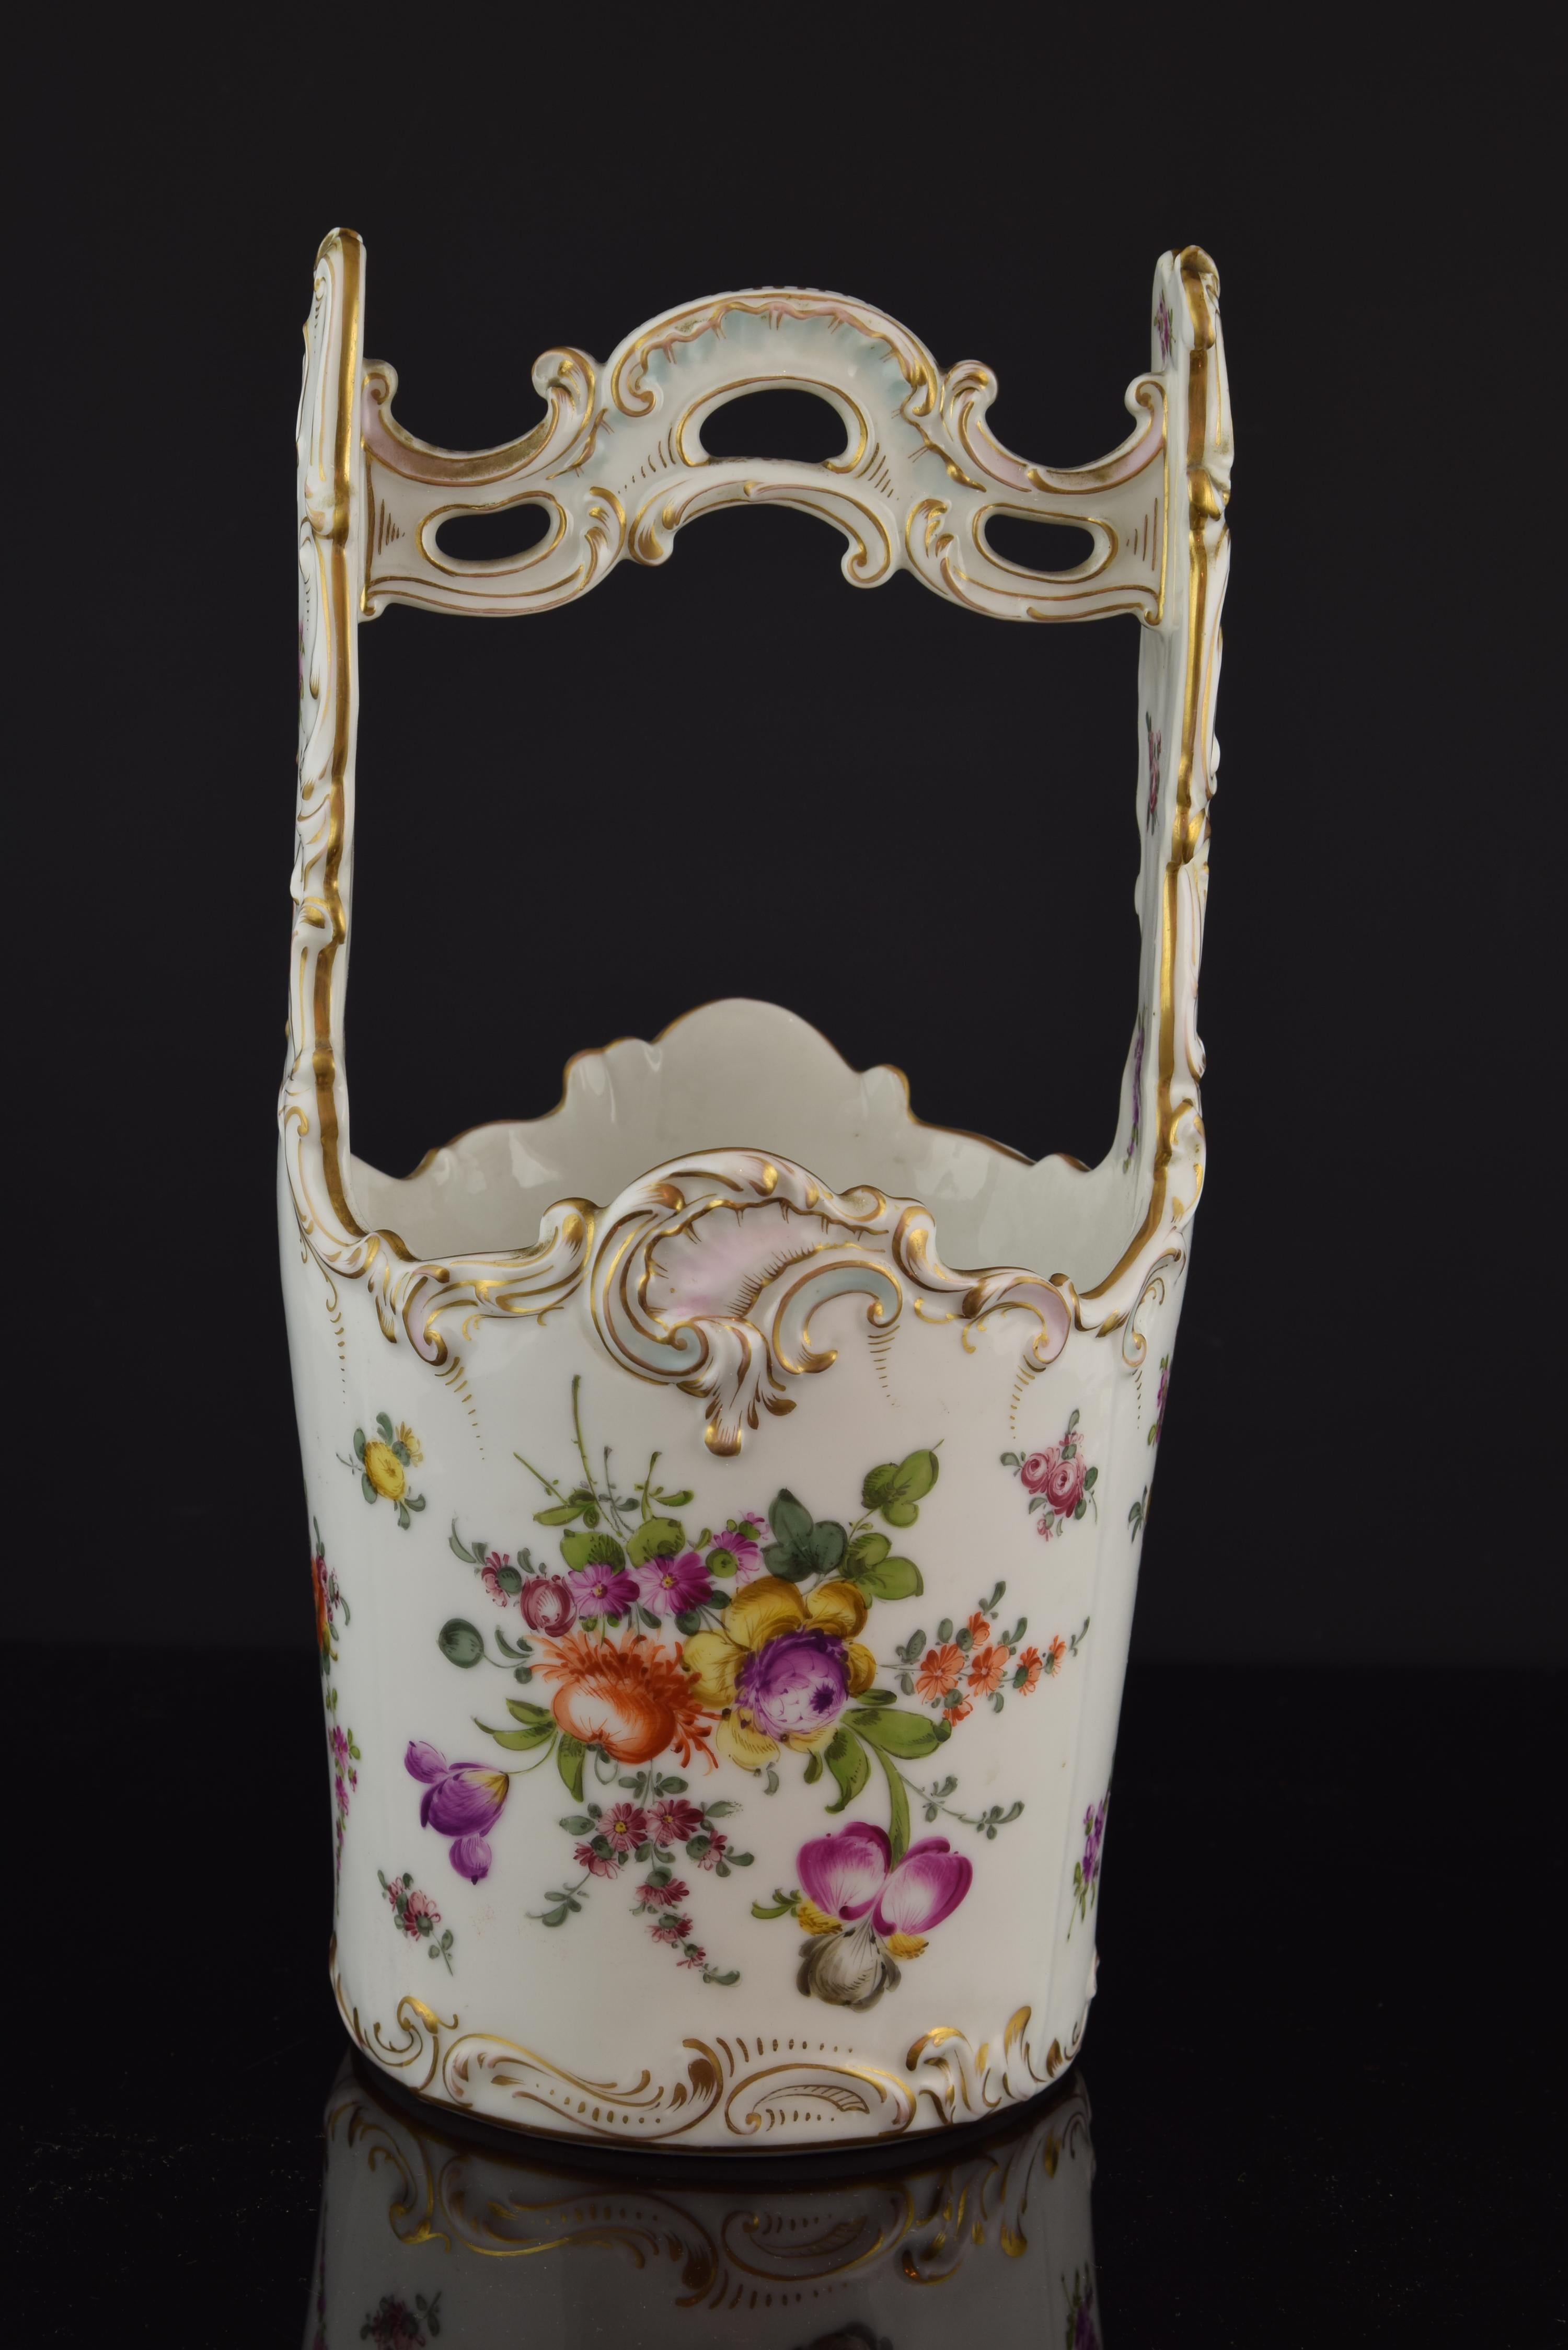 Porcelain enameled piece with golden details that allows to place flowers inside. Shaped like a bucket, it has a handle decorated with shapes inspired by Rococo from the 18th century, which are also present on the edge of the piece and at the lower